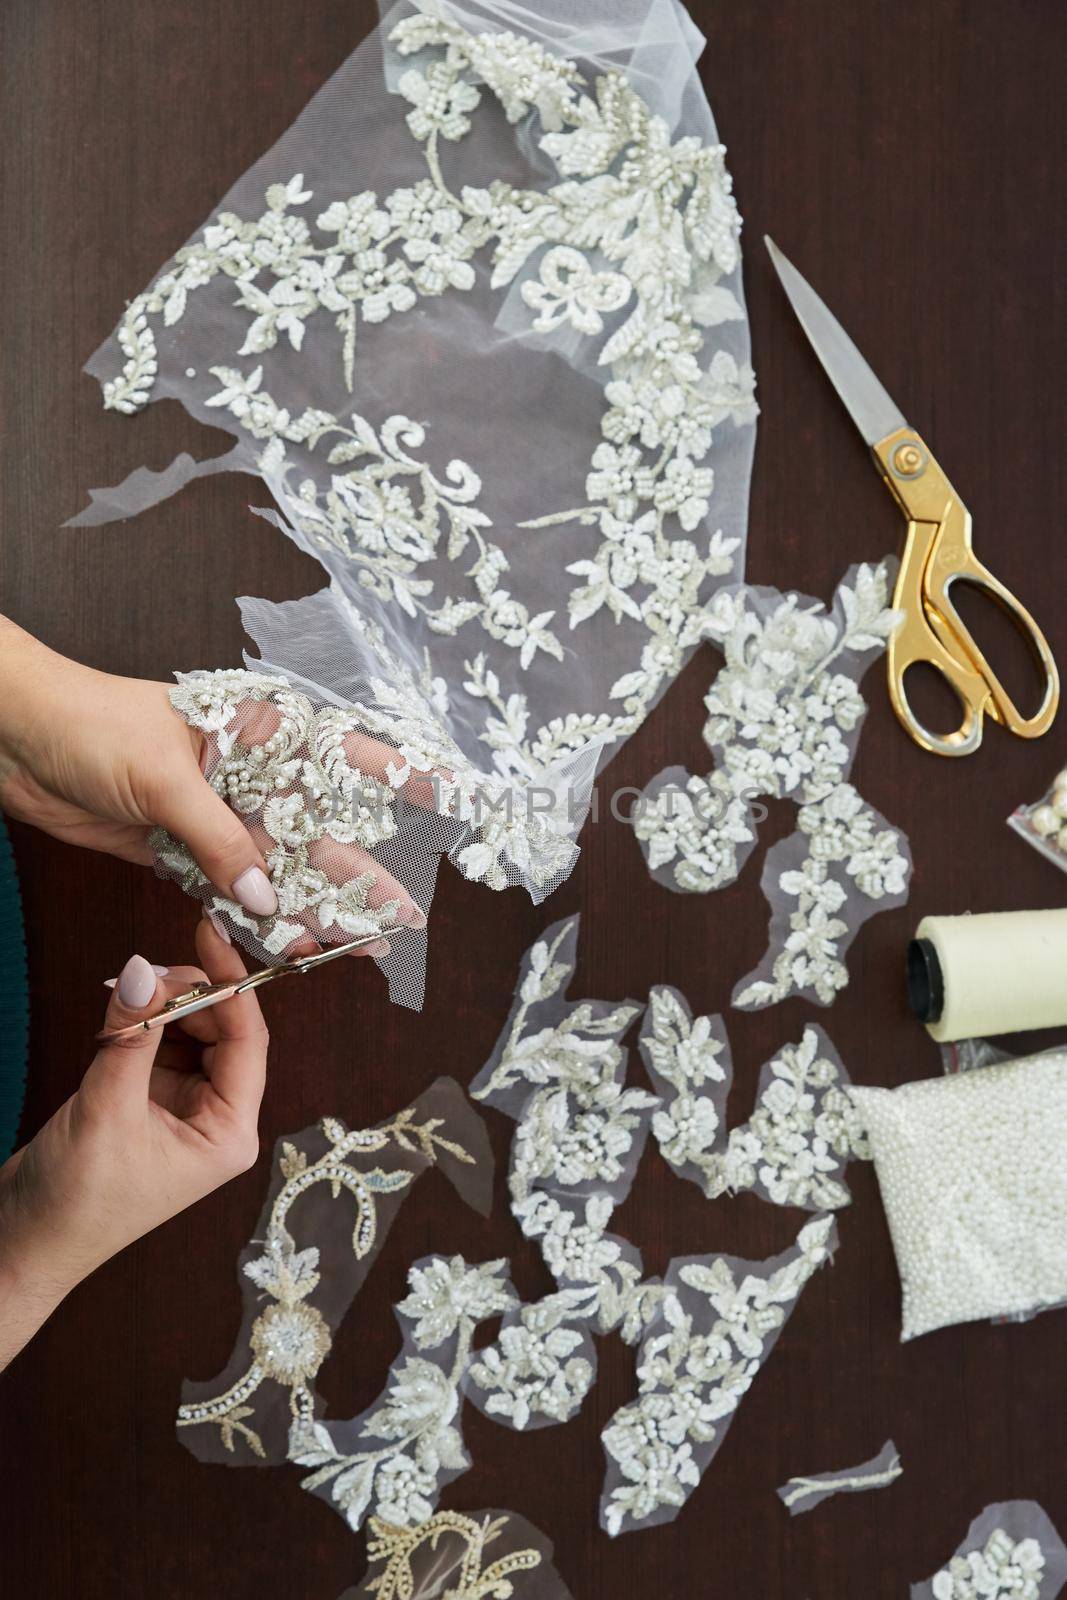 Dressmaker cutting lace fabric for wedding dress decoration by Mariakray